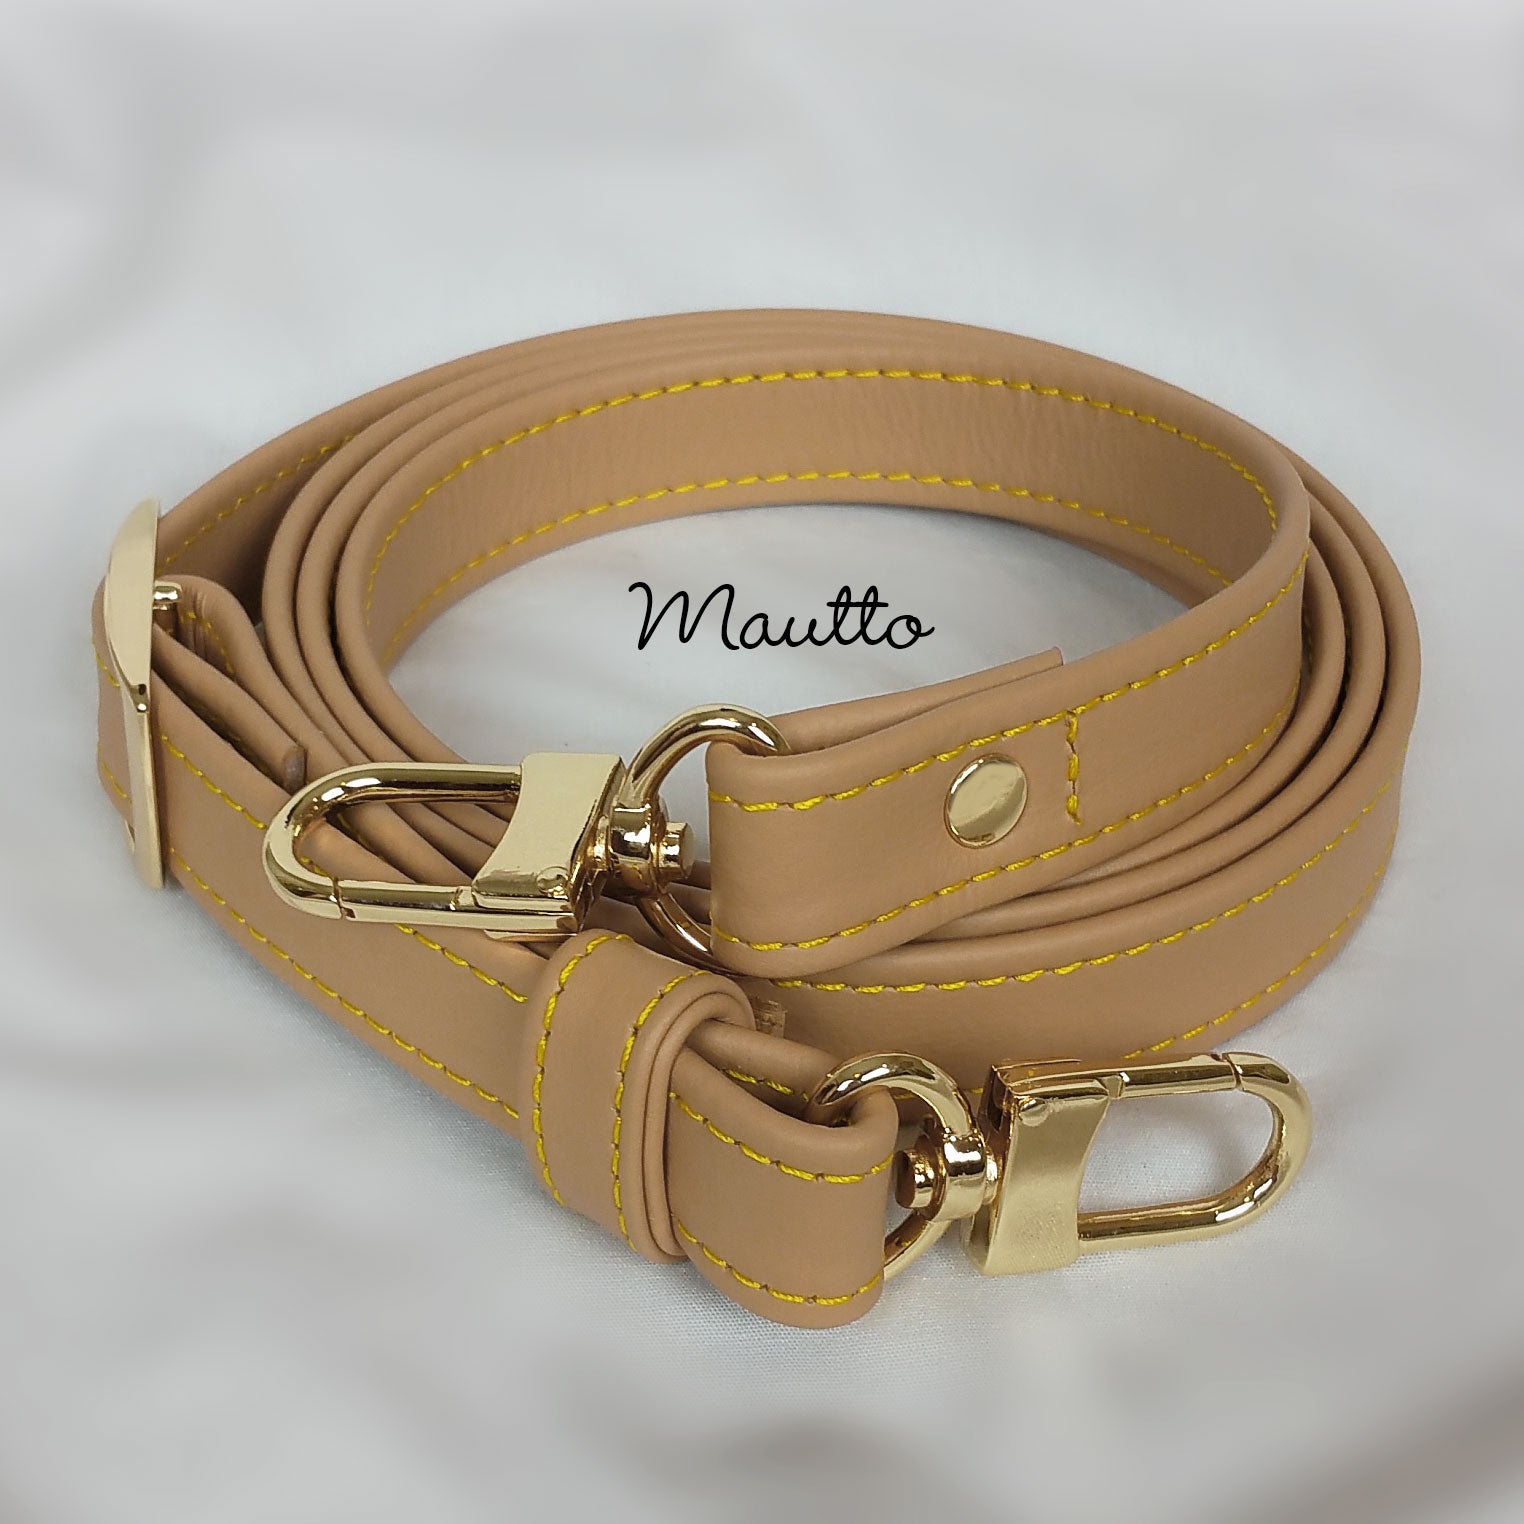 Mautto Tan Leather Strap with Yellow Stitching for Louis Vuitton Bags Light Tan Leather / 35-55 Crossbody / Silver-Tone